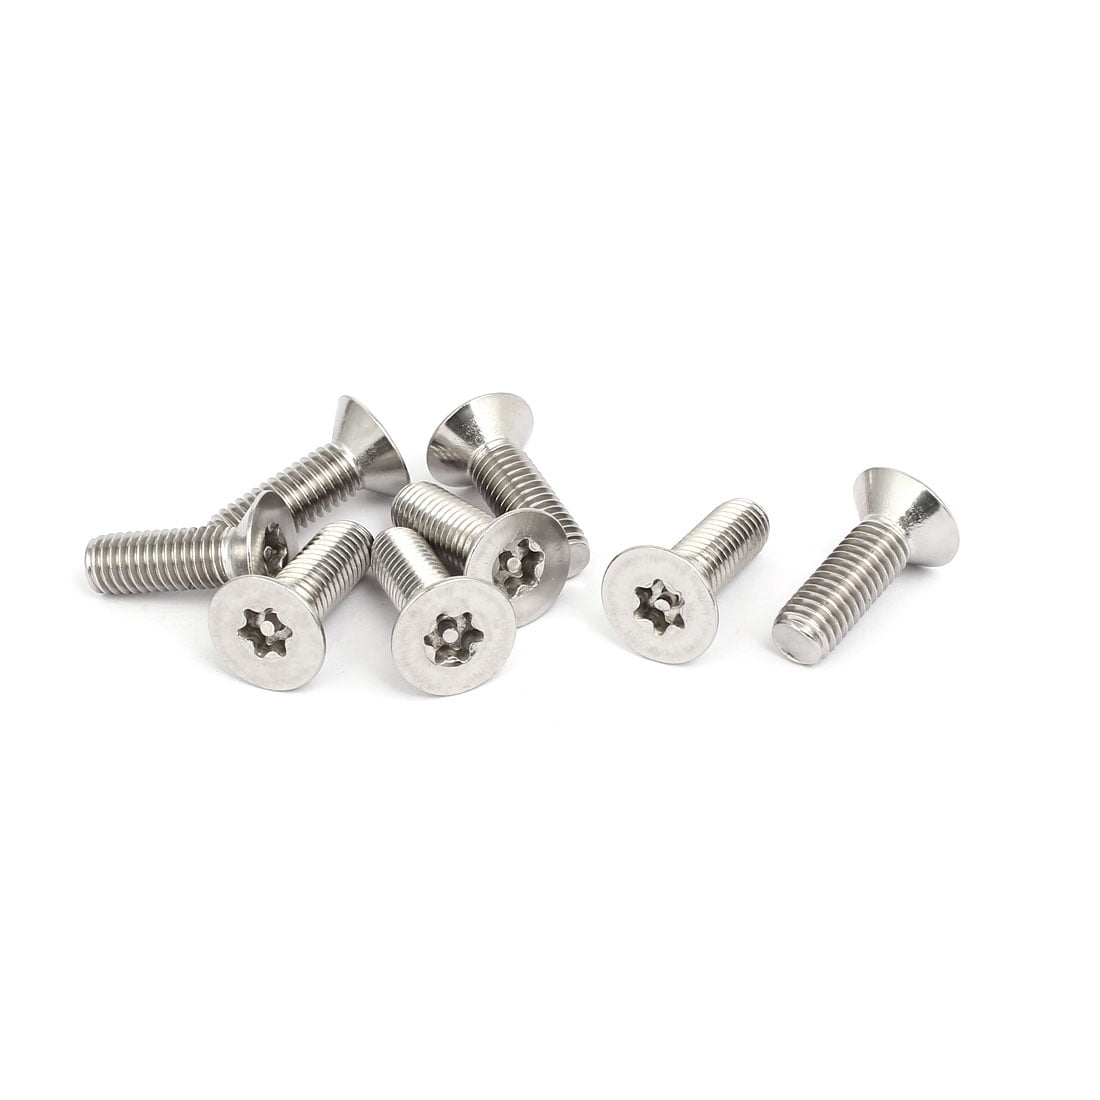 Qty 50 Button Post Torx M8 x 30mm Stainless T40 Security Screw Tamperproof 304 